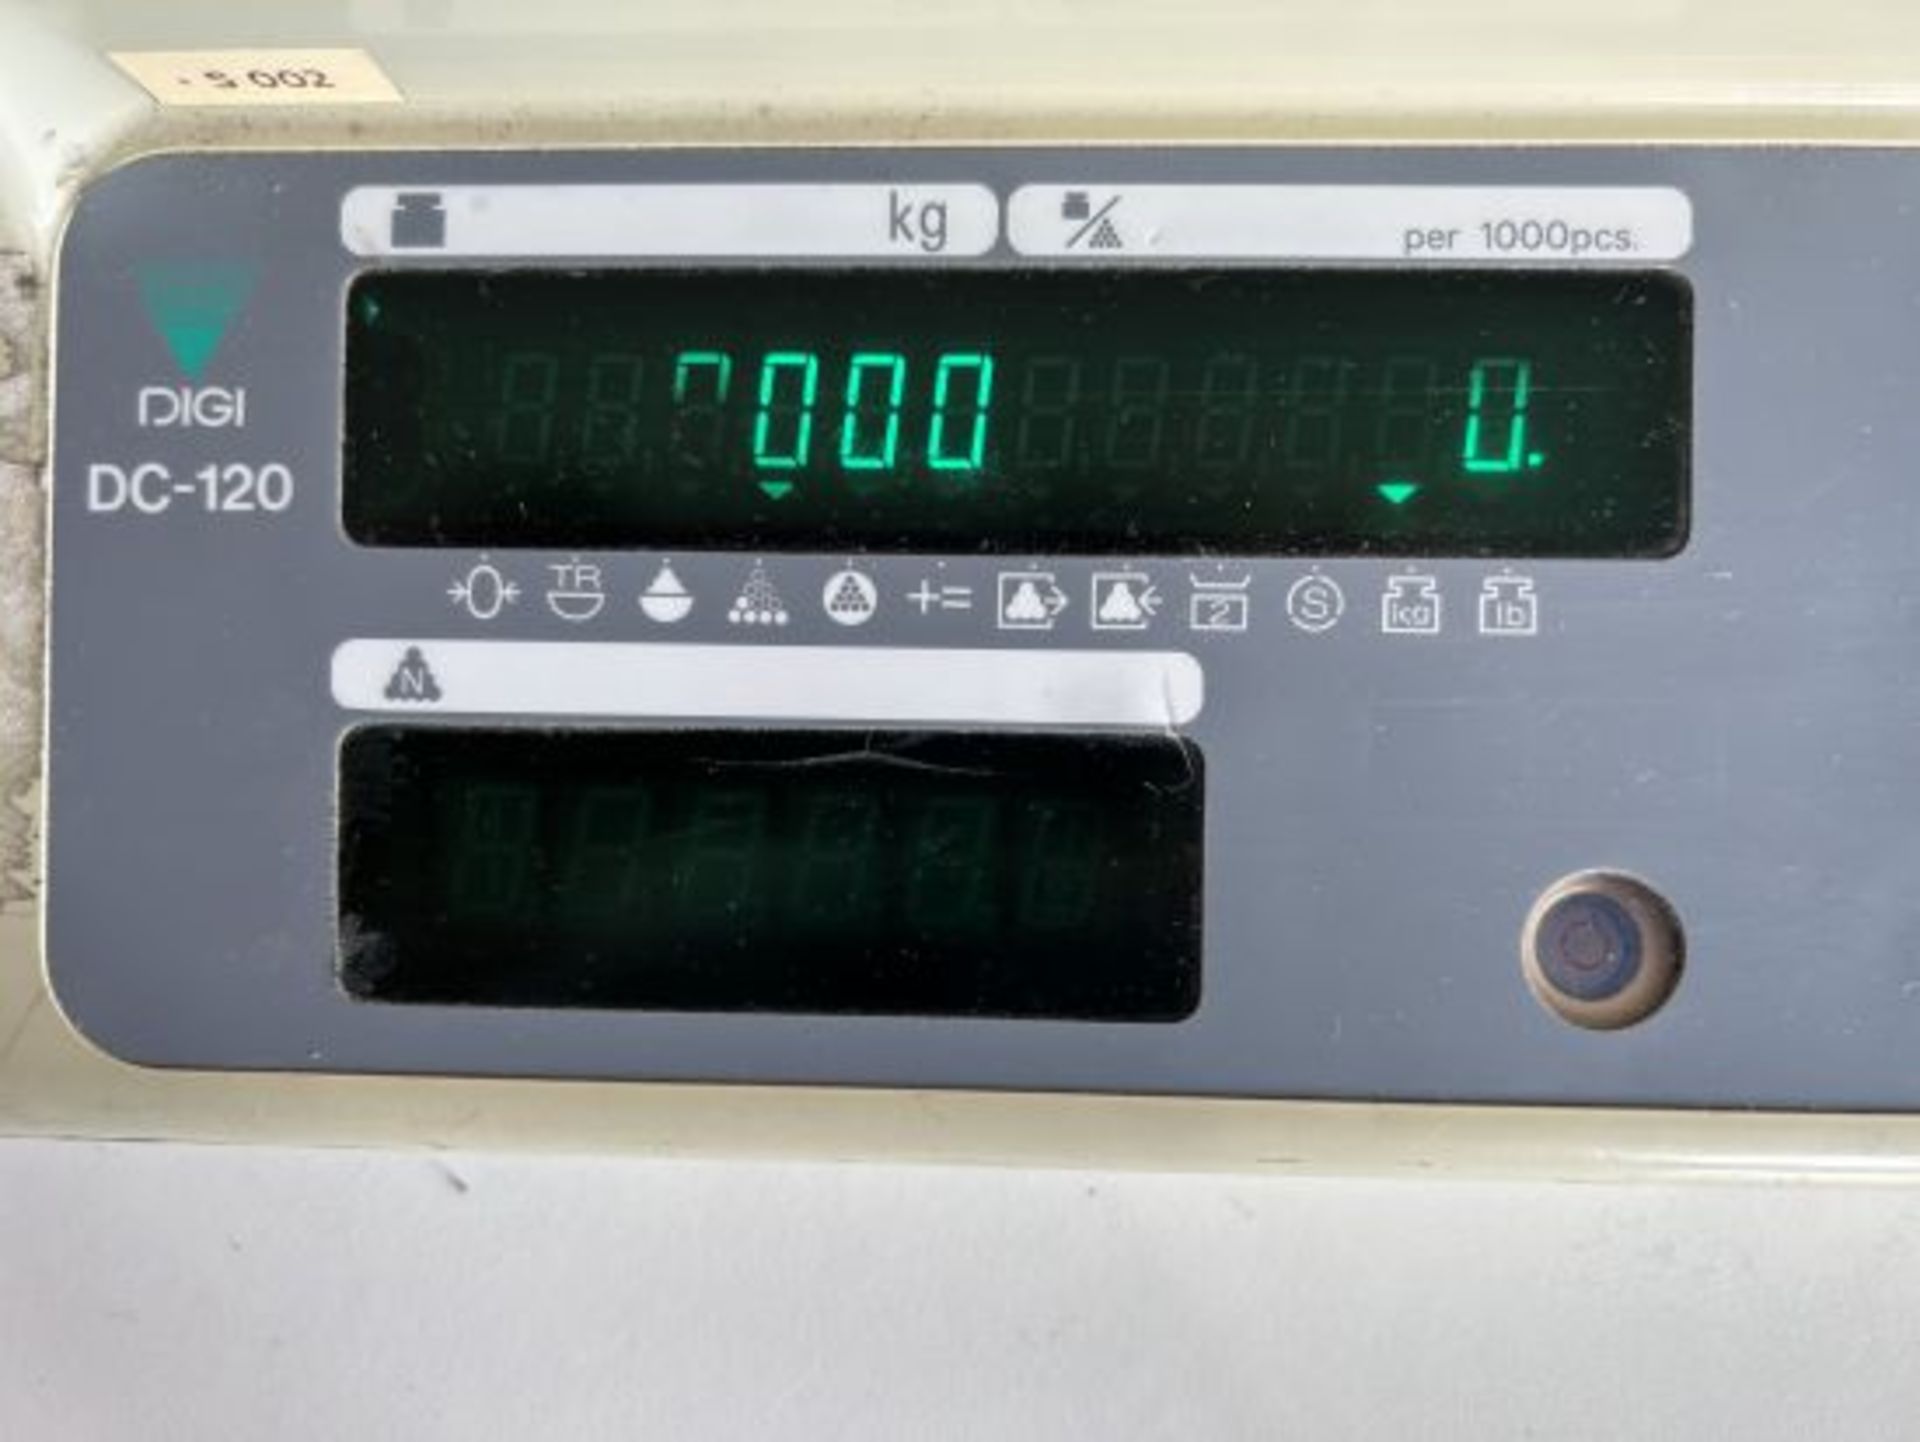 Digi DC-120 Benchtop Weighing Scales, Max Capacity 10Kgs, Single Phase. - Image 2 of 2